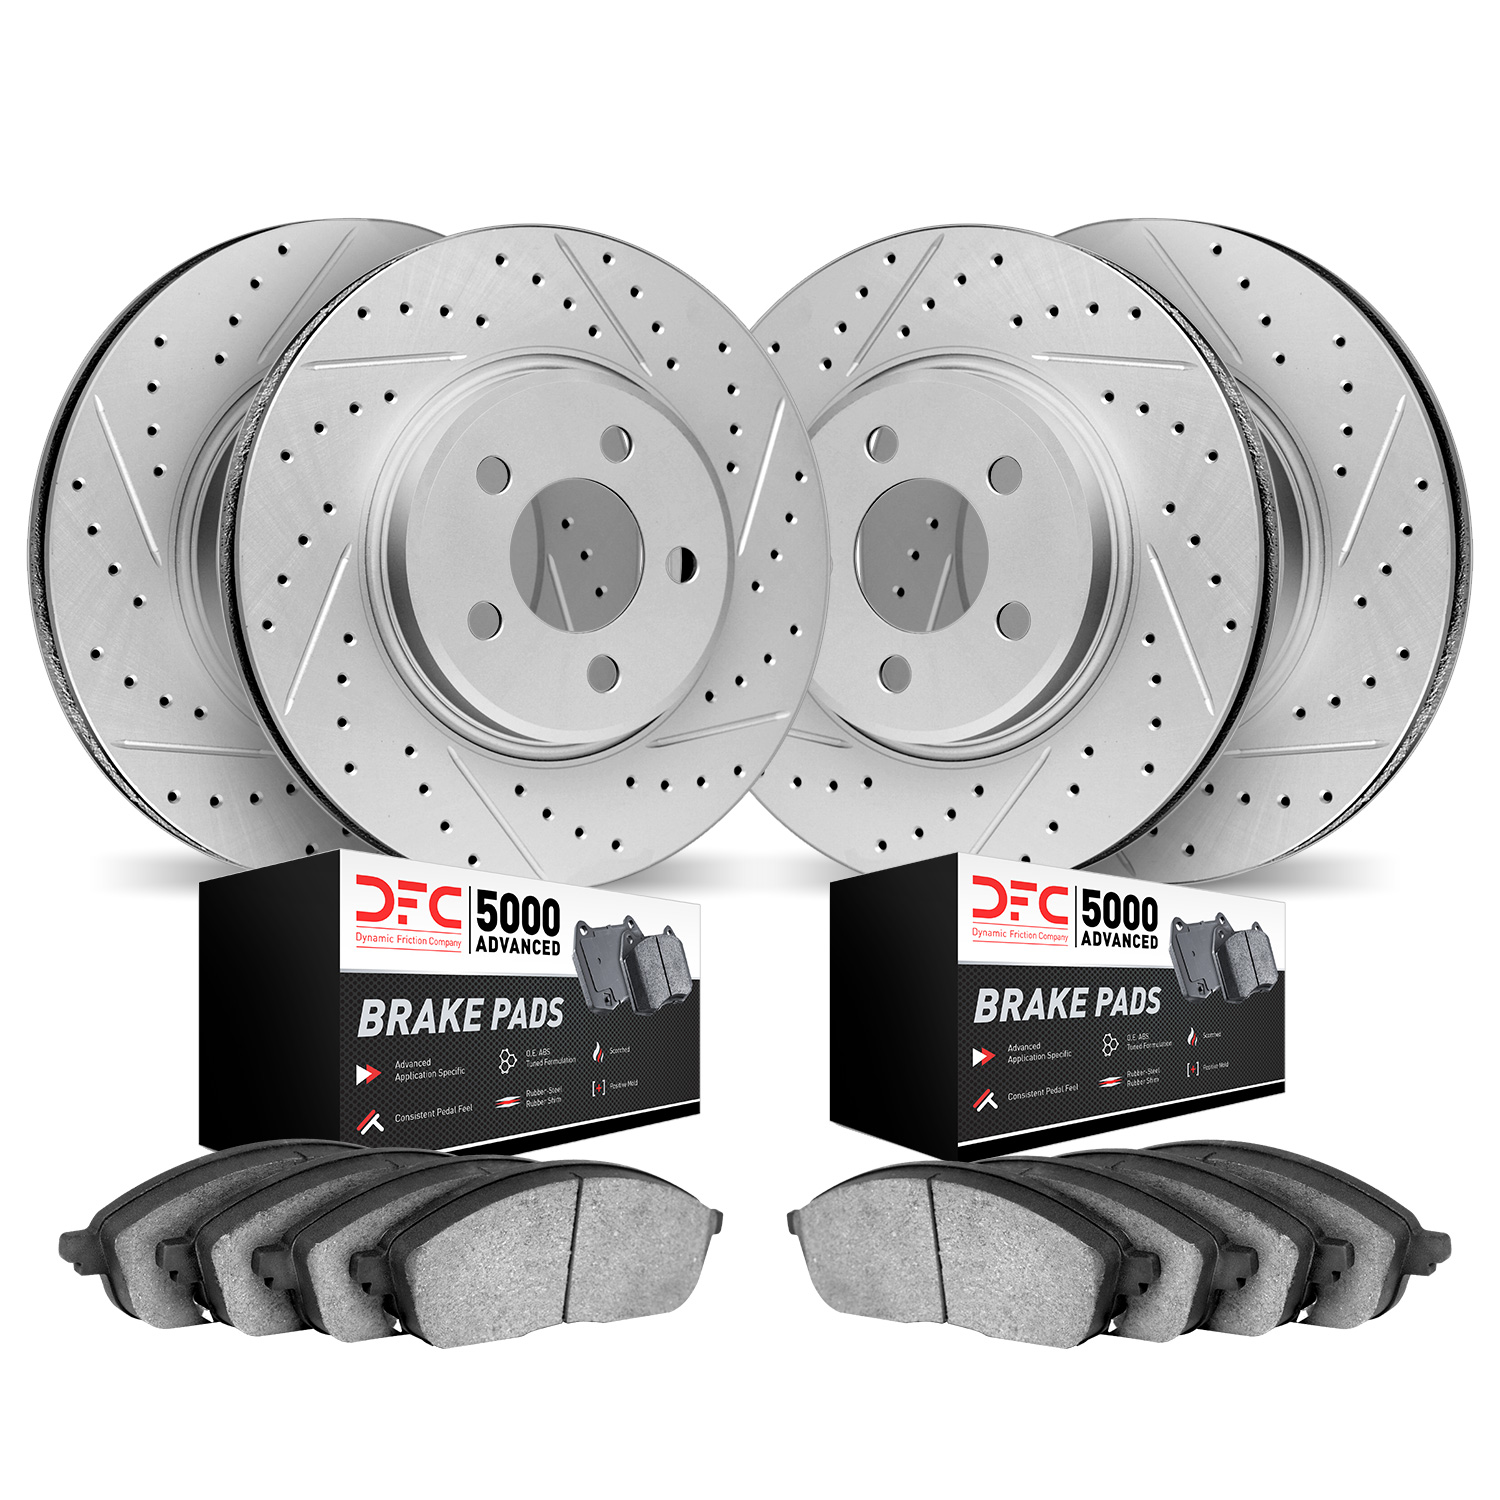 2504-27013 Geoperformance Drilled/Slotted Rotors w/5000 Advanced Brake Pads Kit, 2017-2019 Volvo, Position: Front and Rear